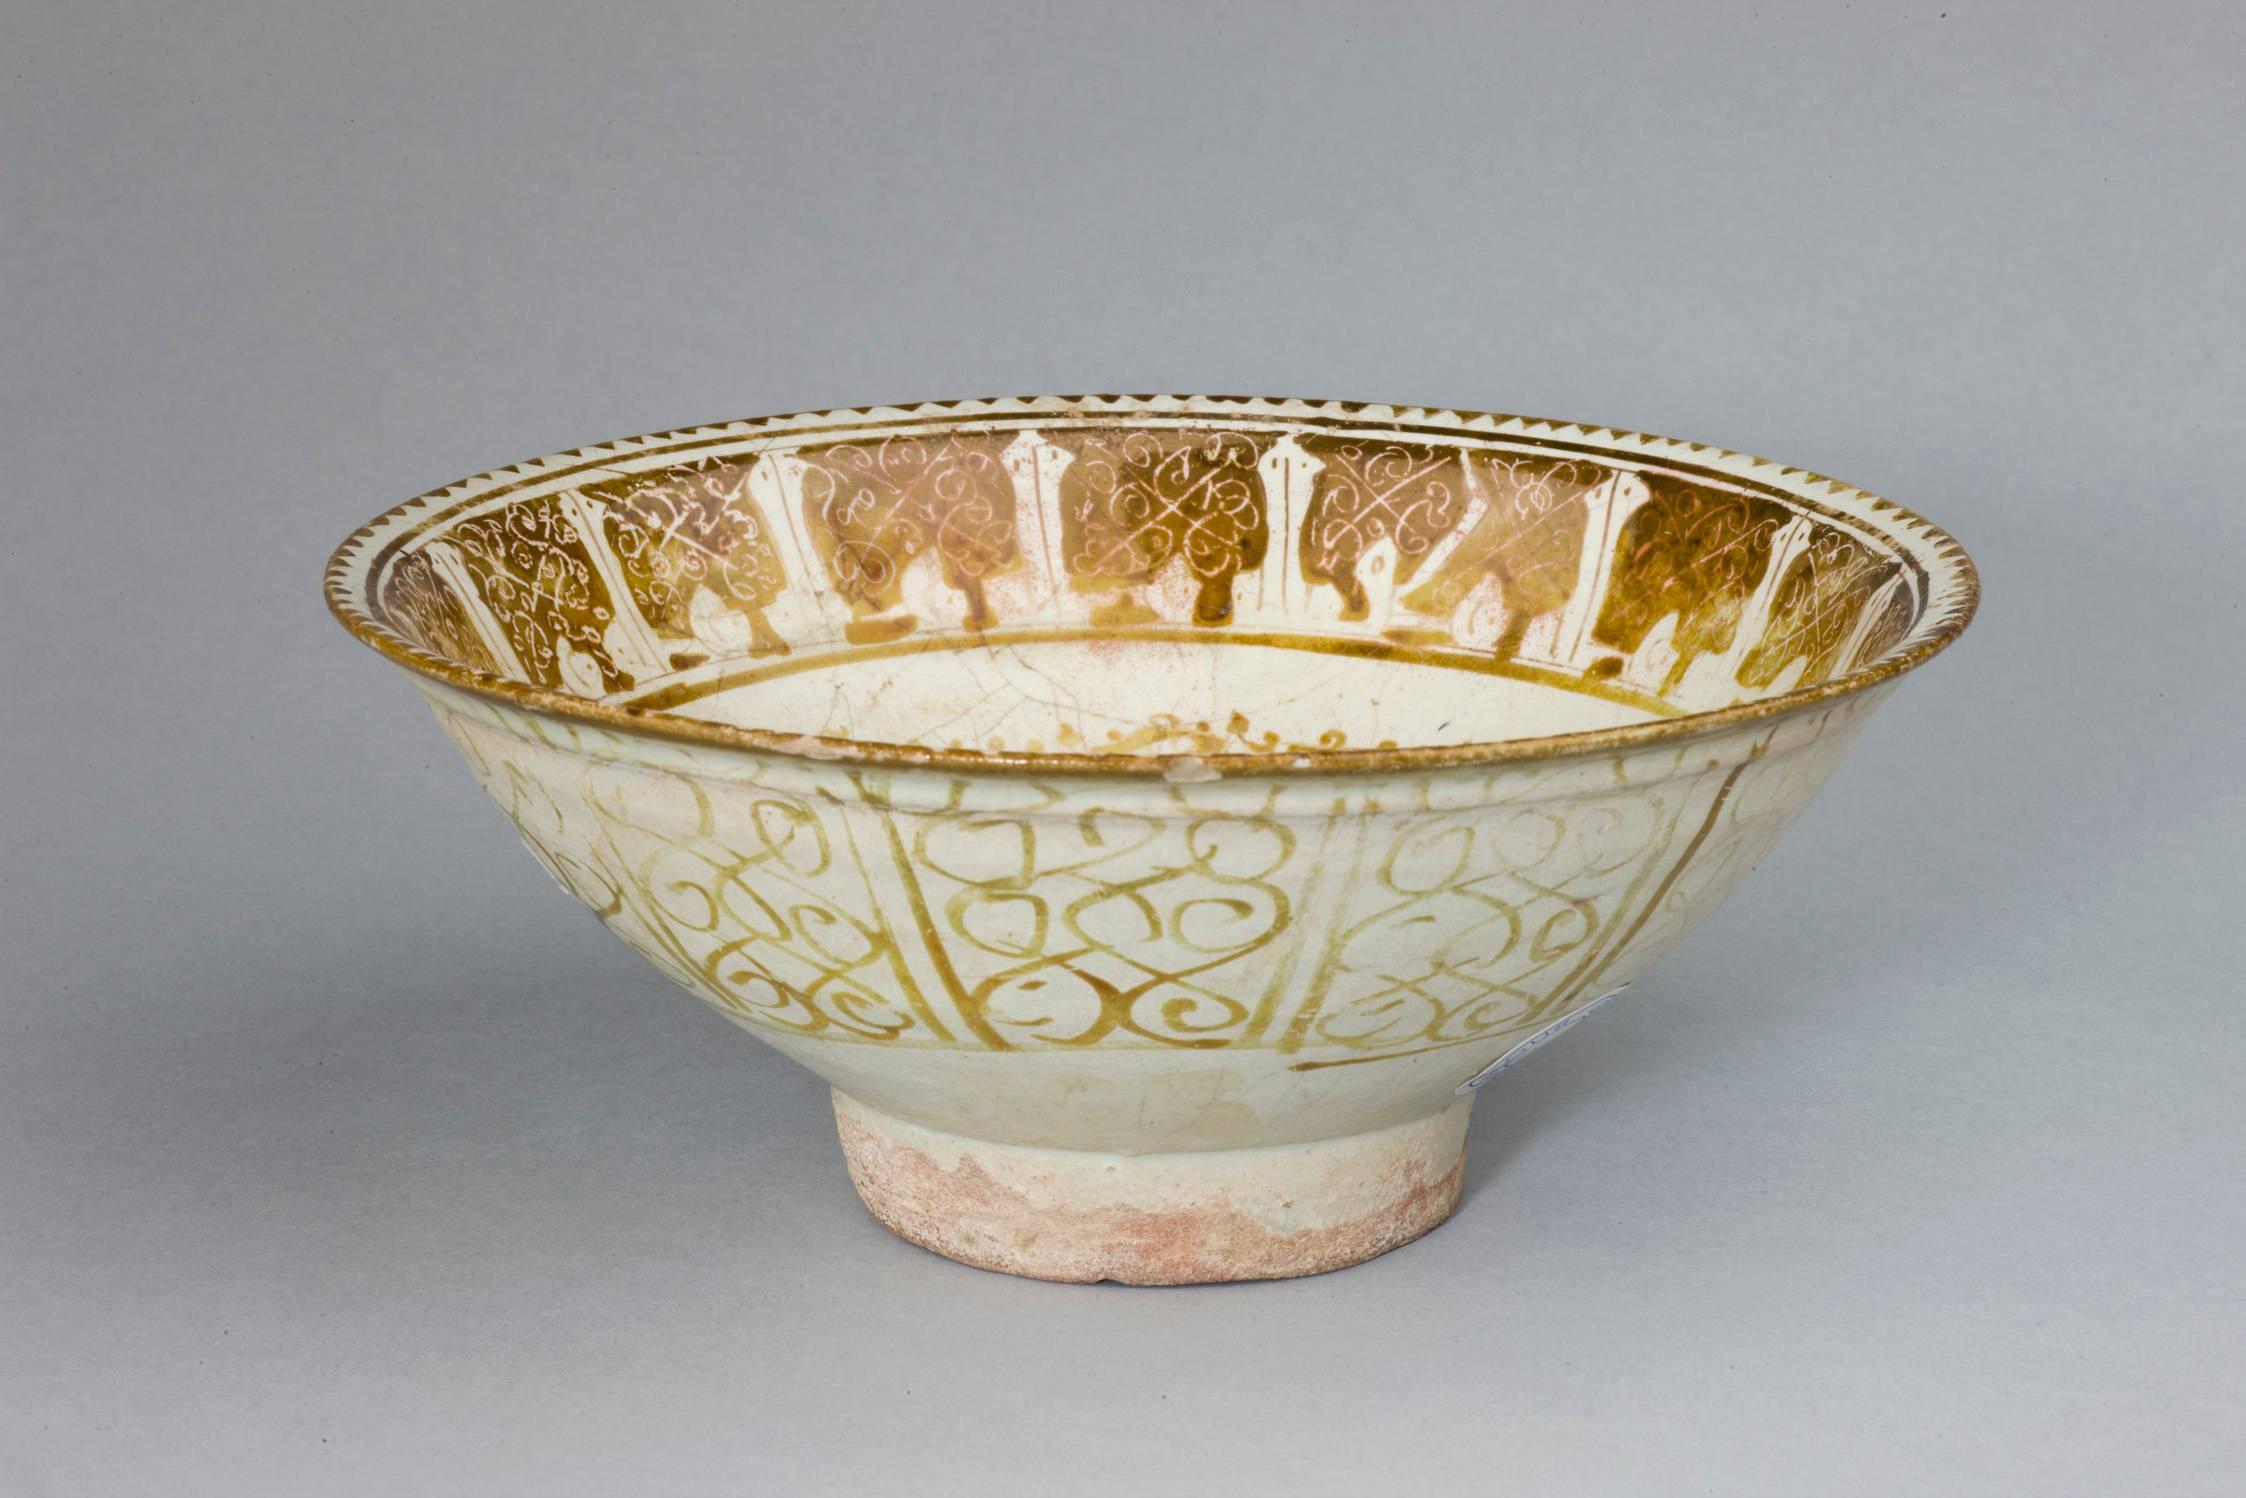 This intact lustre bowl is densely decorated in yellow lustre with a foliated motif in the centre, the well with dots and interlocking split palmettes radiating from a central medallion. A large band below the rim is heavily ornamented in drawn